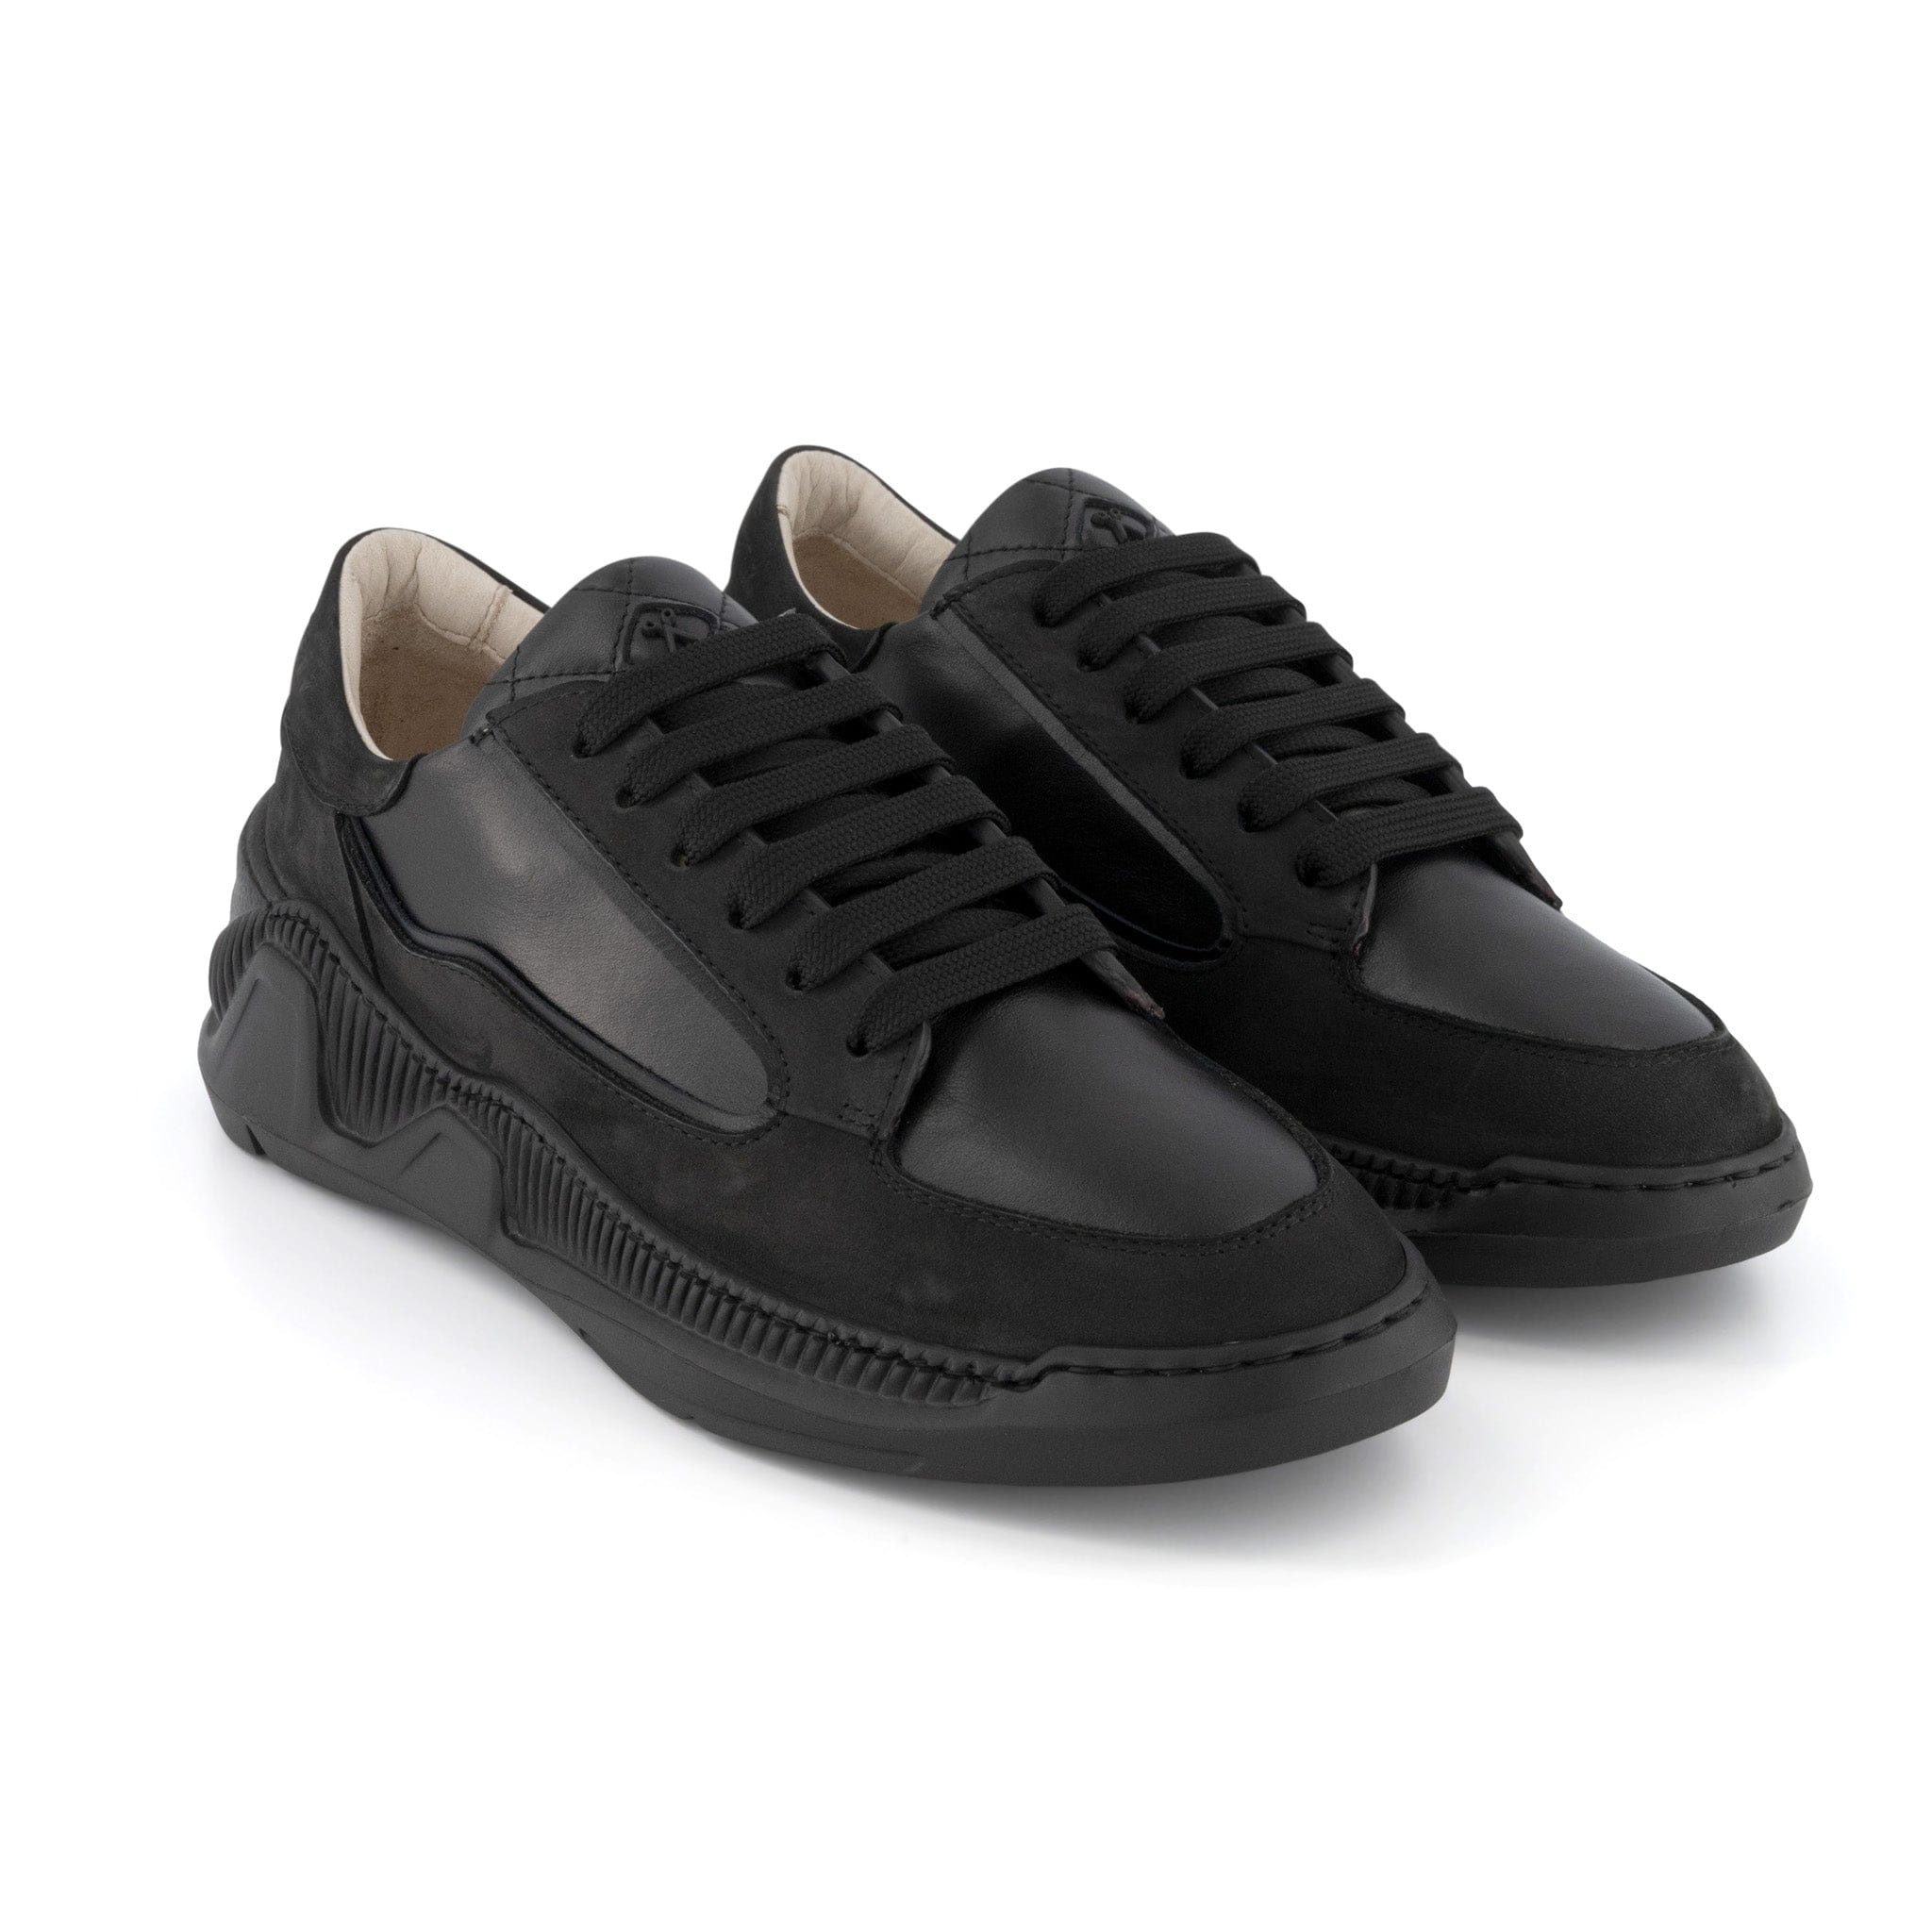 Nesto Low Top Italian Leather Sneaker | All Black | Black Outsole | Made in Italy